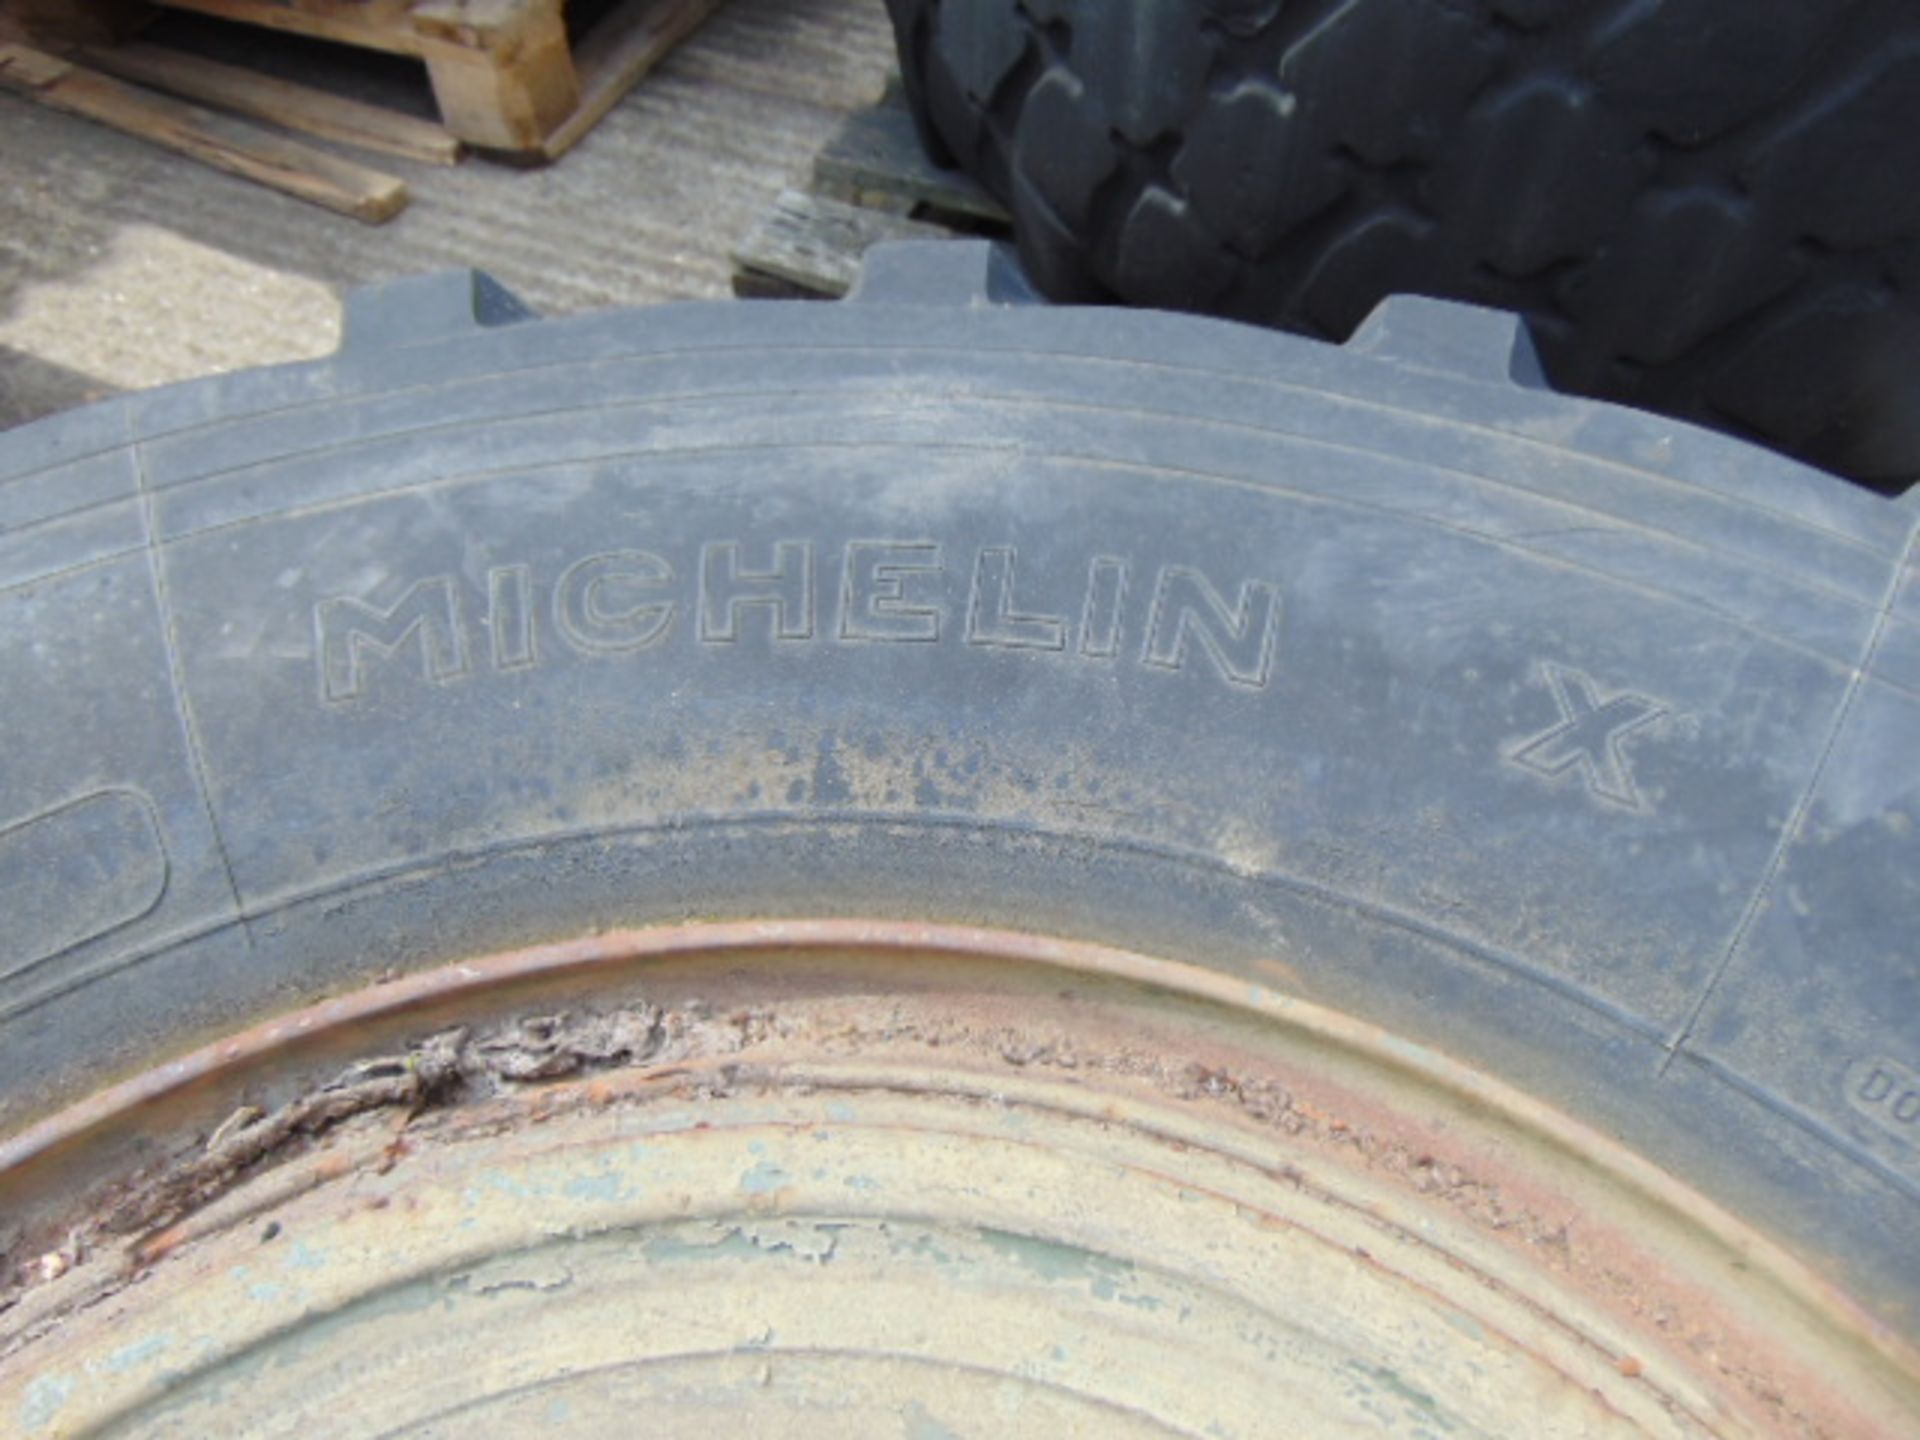 1 x Michelin G-20 Pilote XL 15.5/80 R20 Tyre on 10 stud Rim - Image 5 of 6